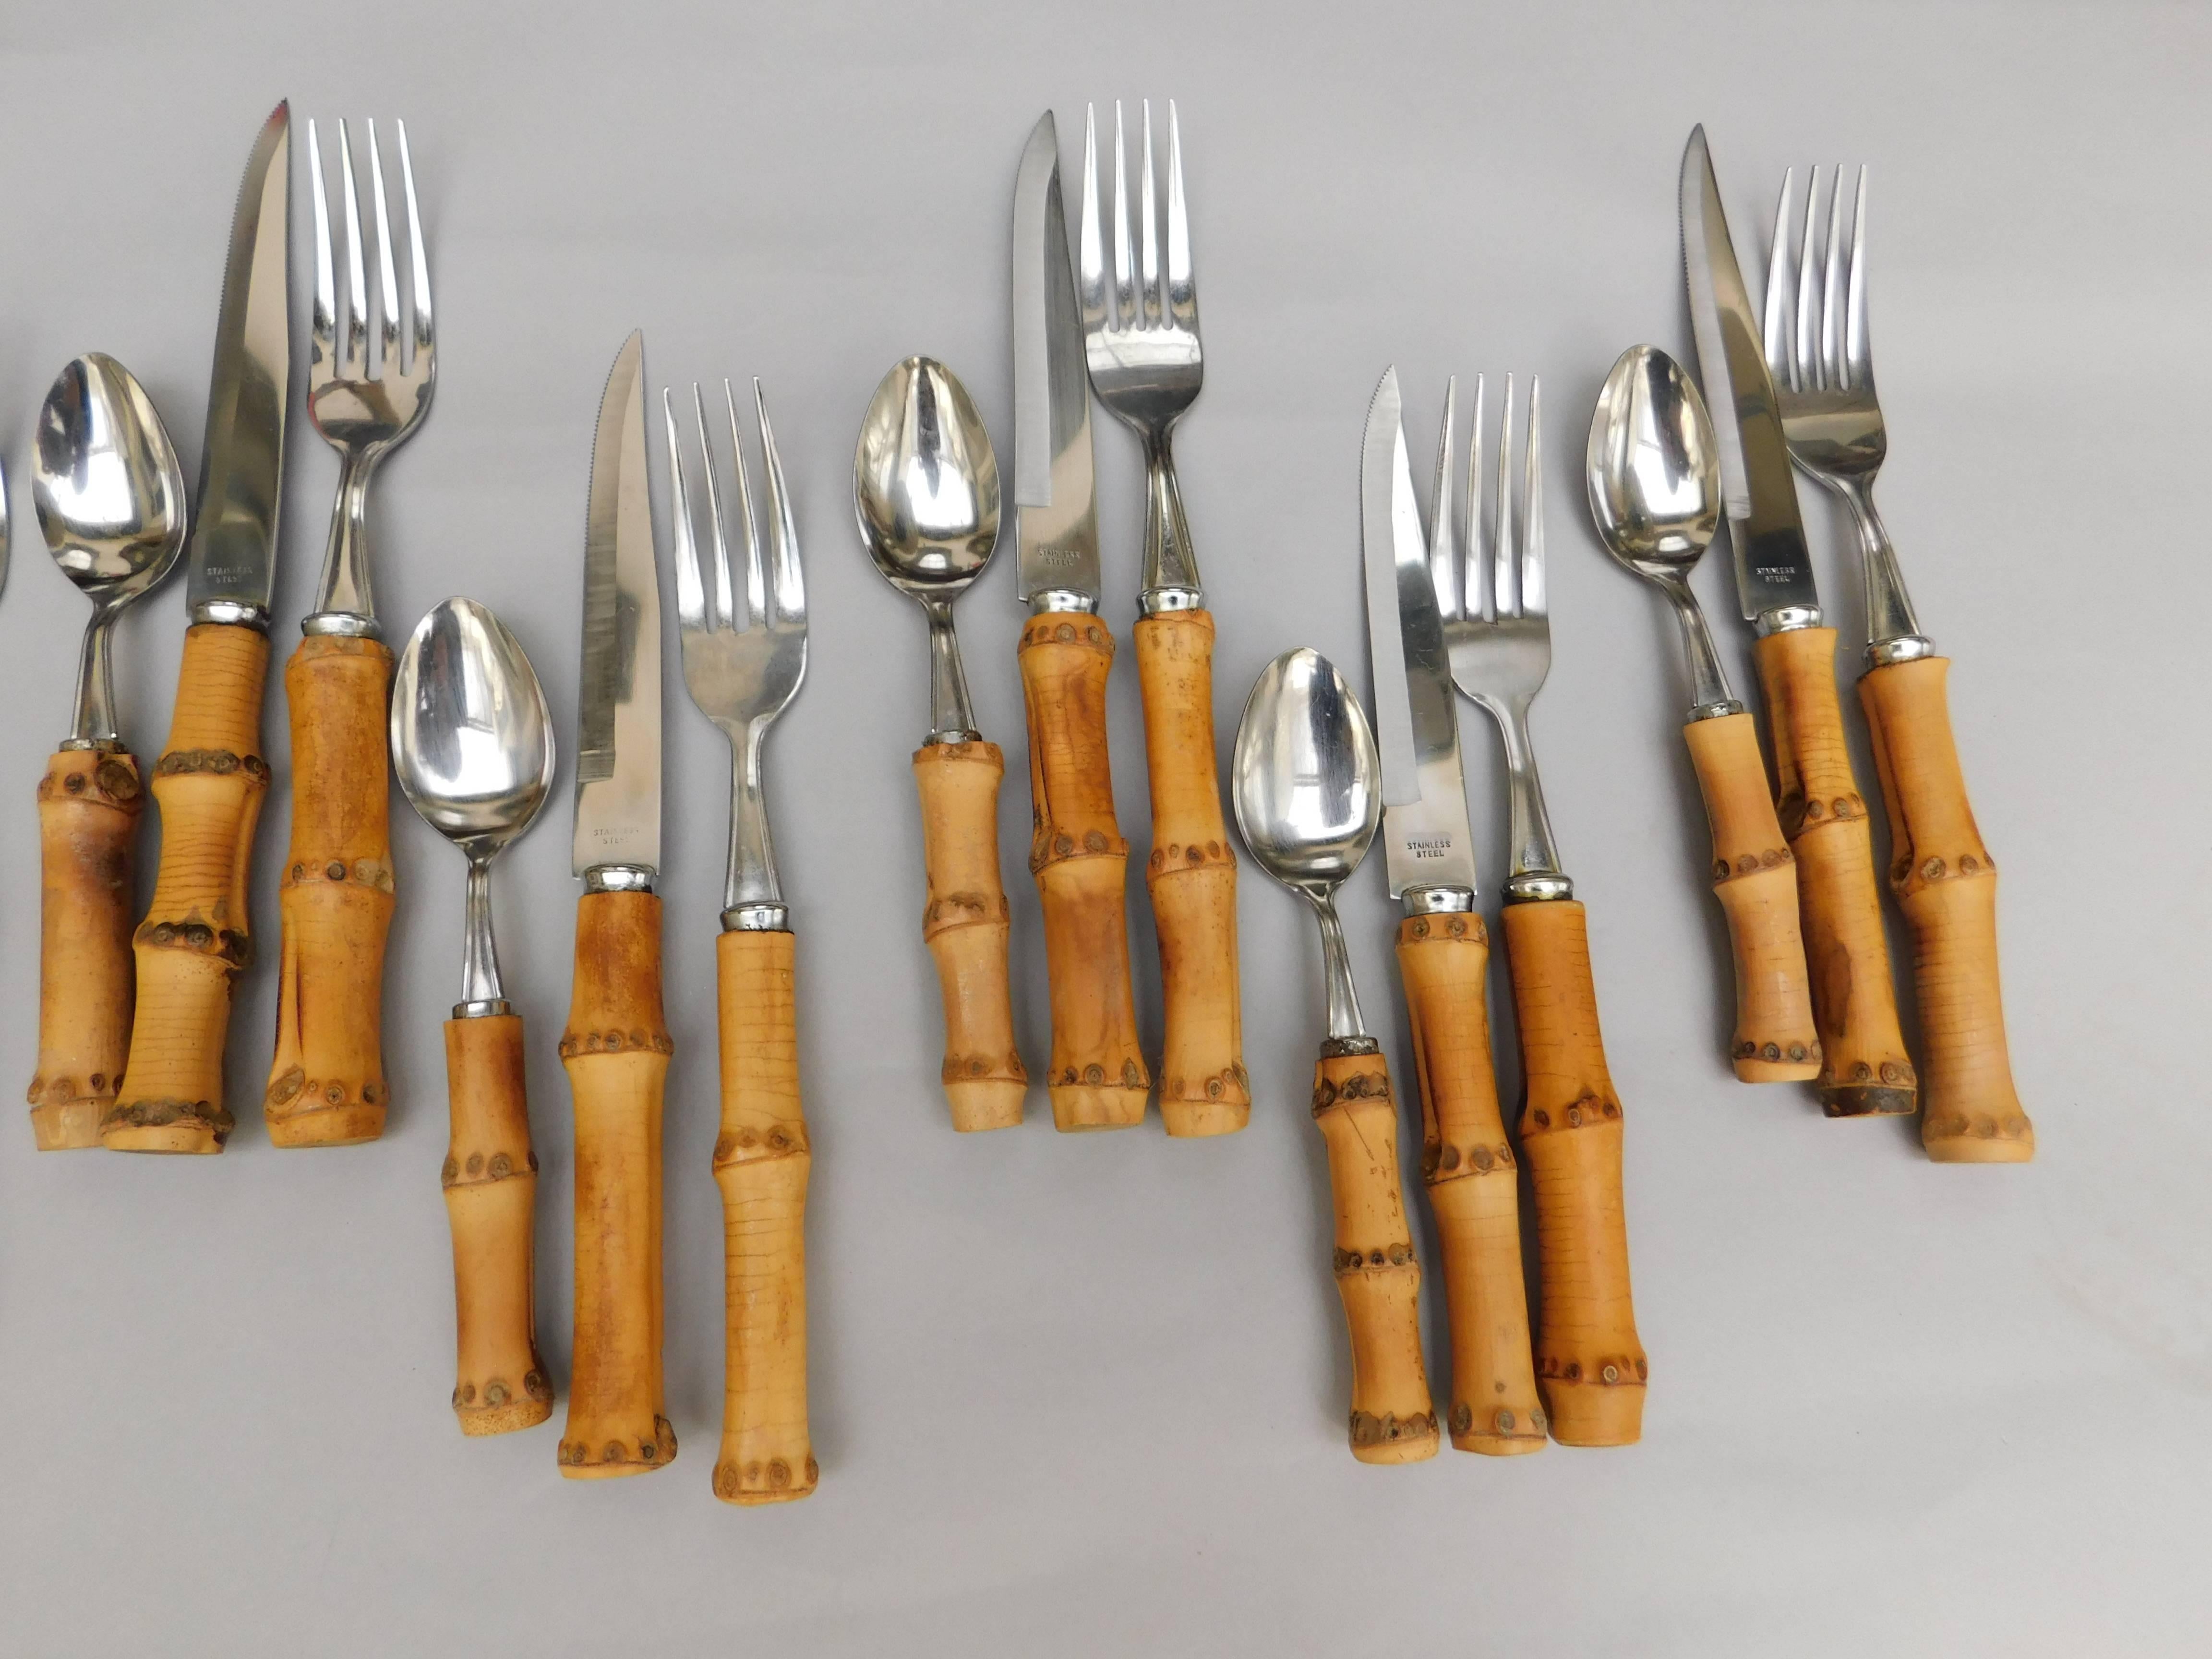 1960s bamboo handled stainless steel flatware set containing 24 pieces.
Eight knives
Eight spoons
Eight forks
measurement listed is for the spoon.
fork and knife=20 cm (8